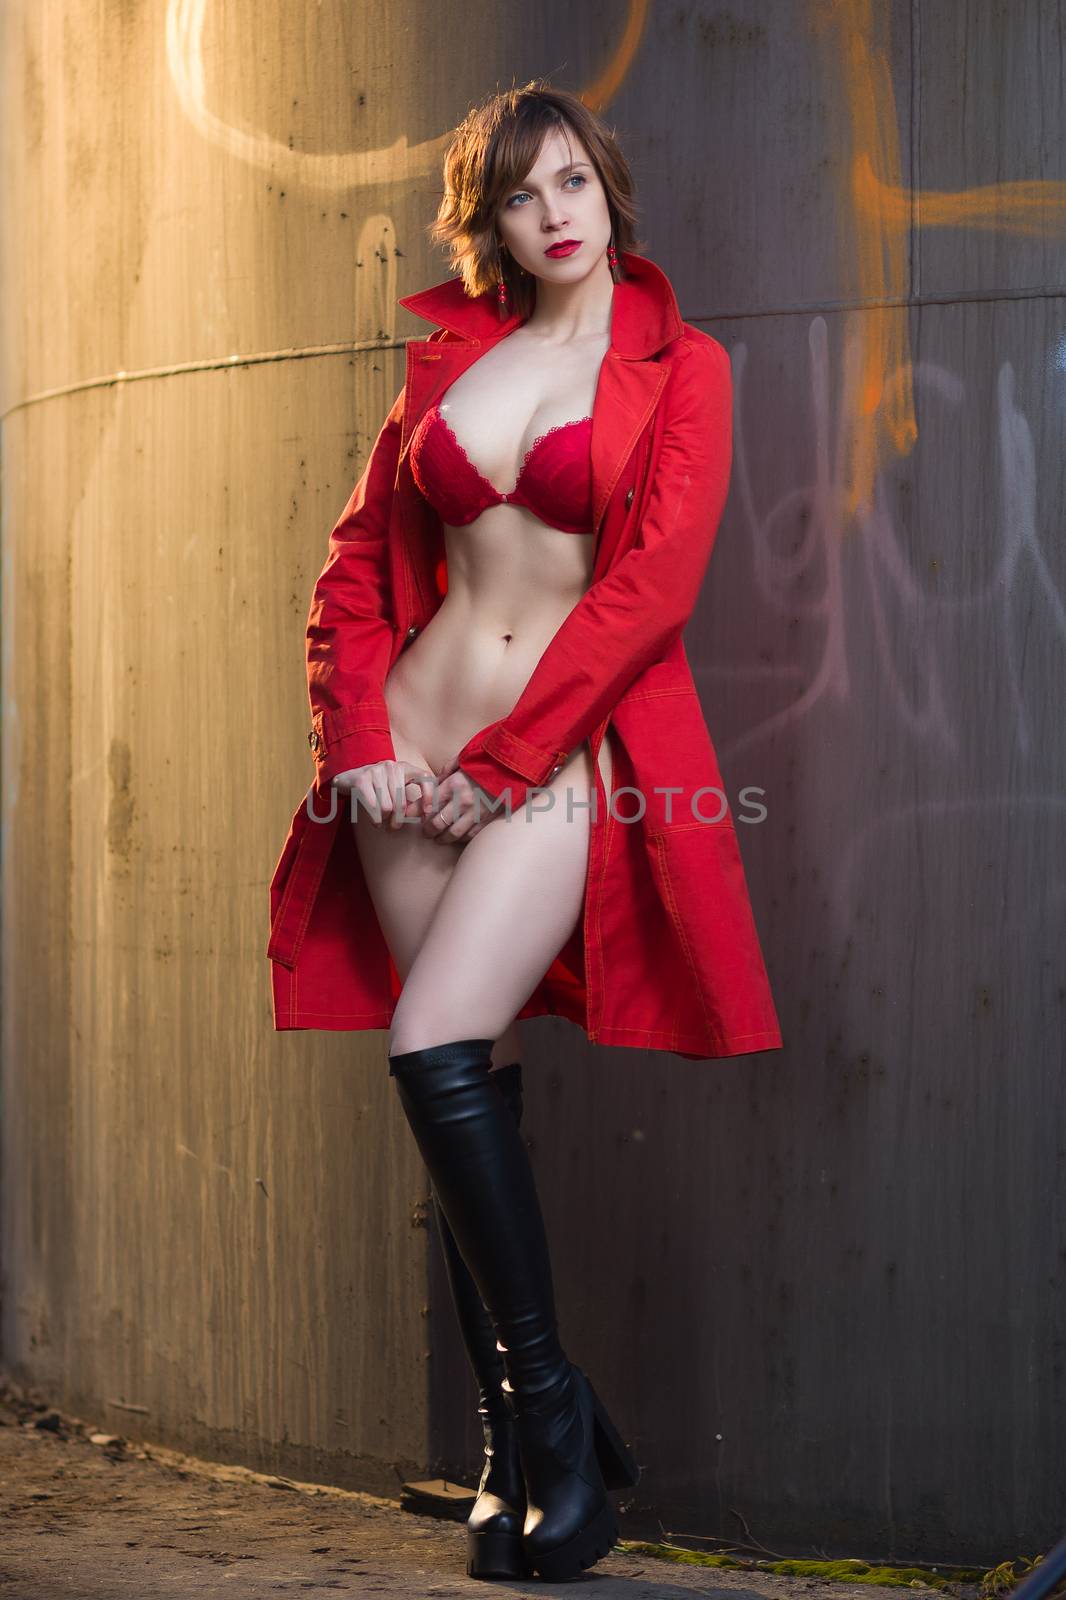 Attractive woman alluring in lingerie and coat. by mrakor